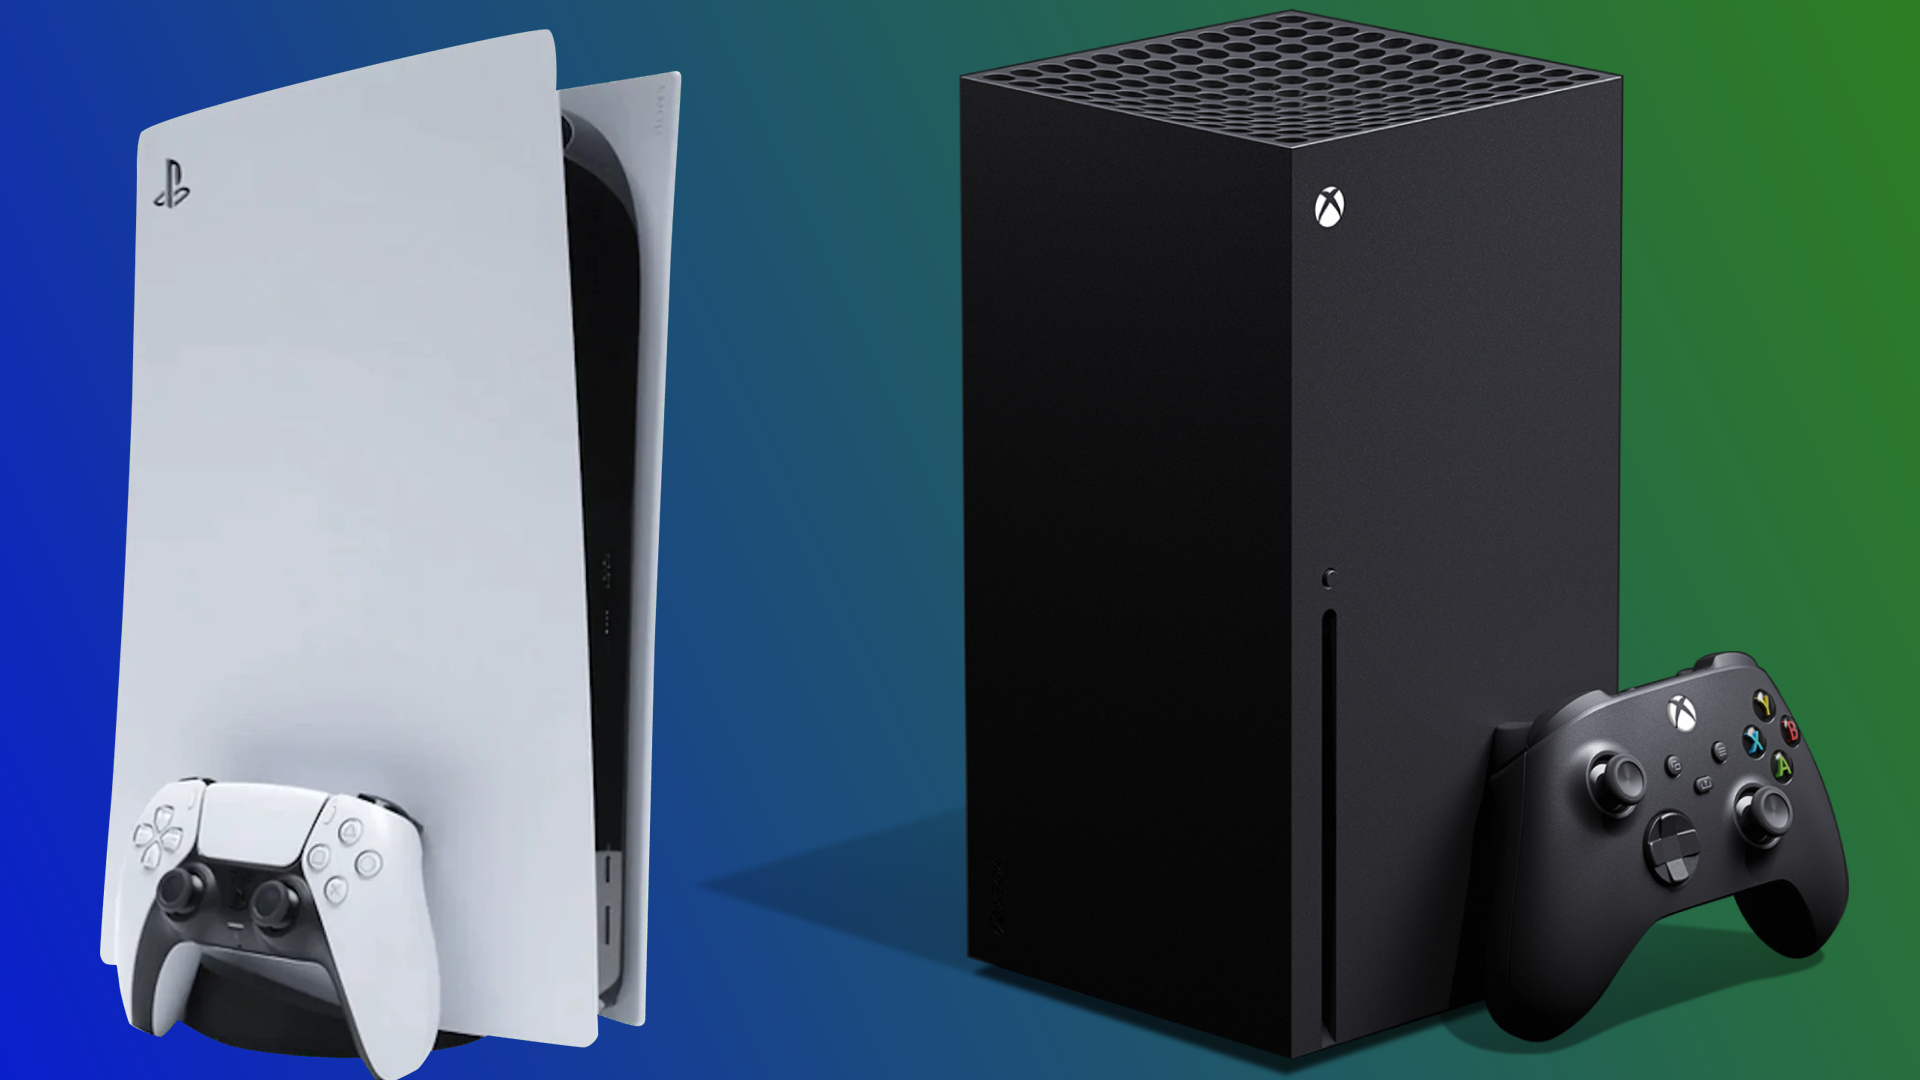 PS5 and Xbox Series X ray tracing: Here's why it's a big deal